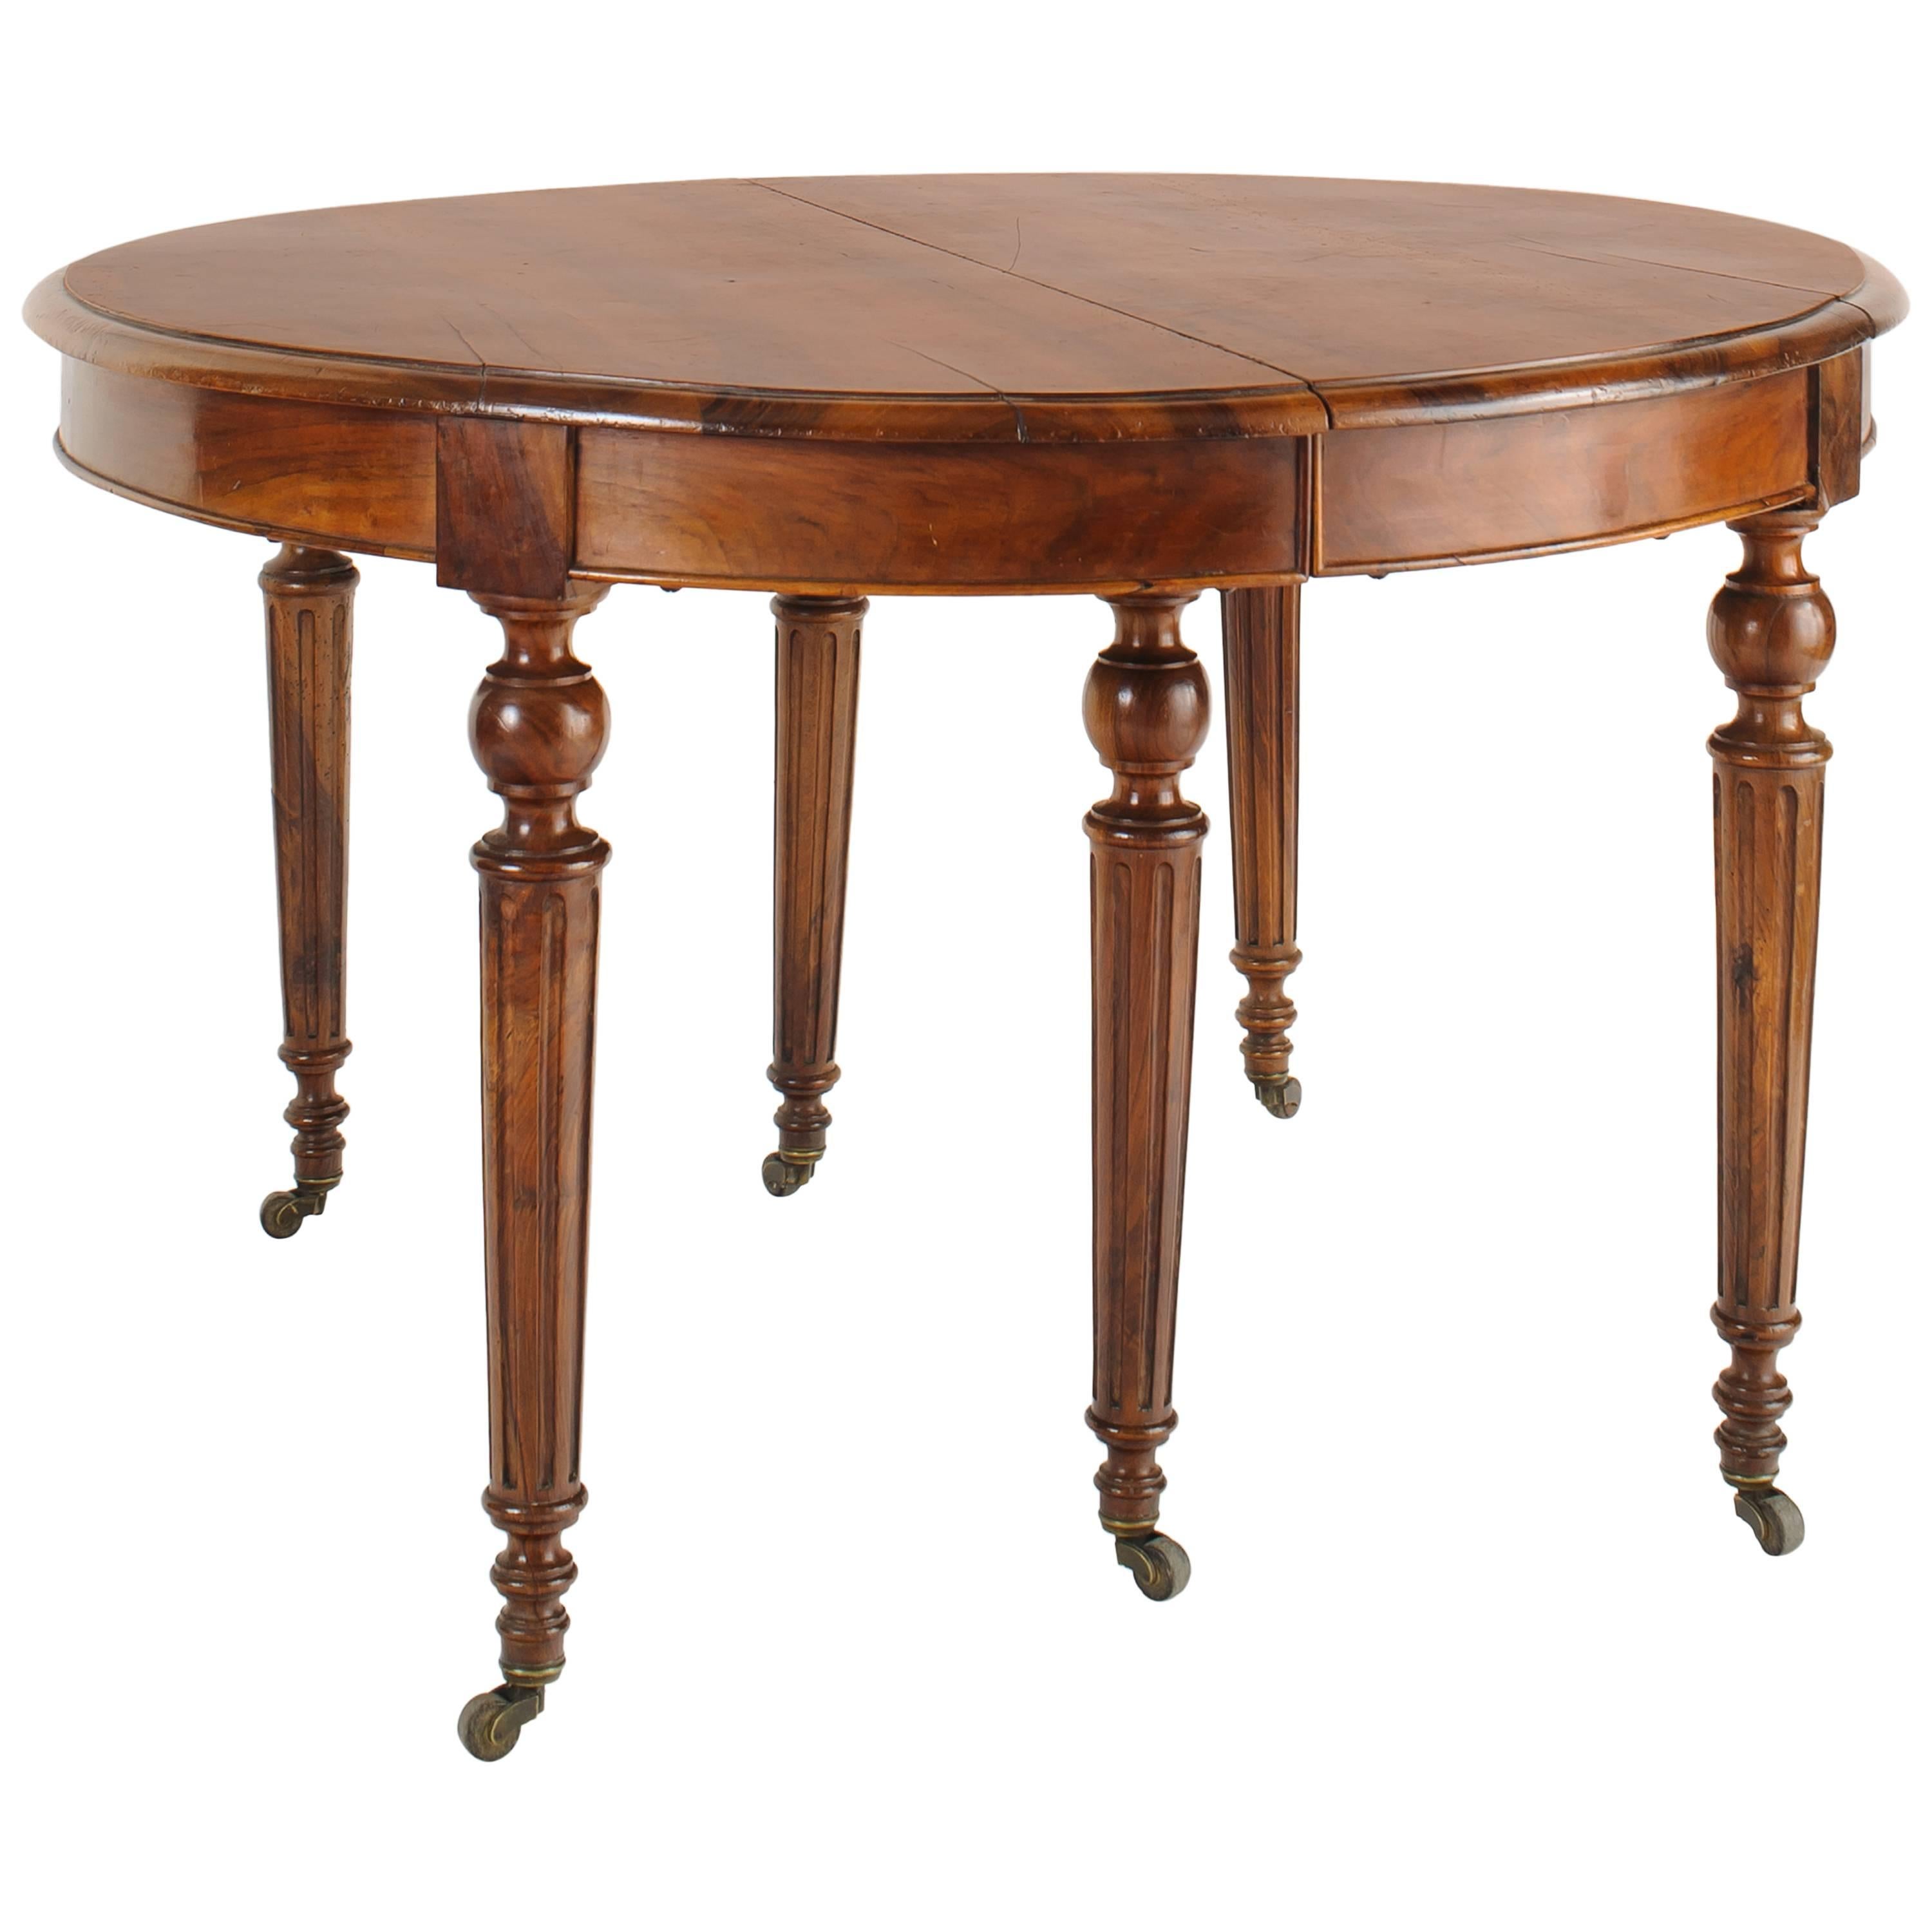 19th Century French Round Walnut Dining Table with Extensions